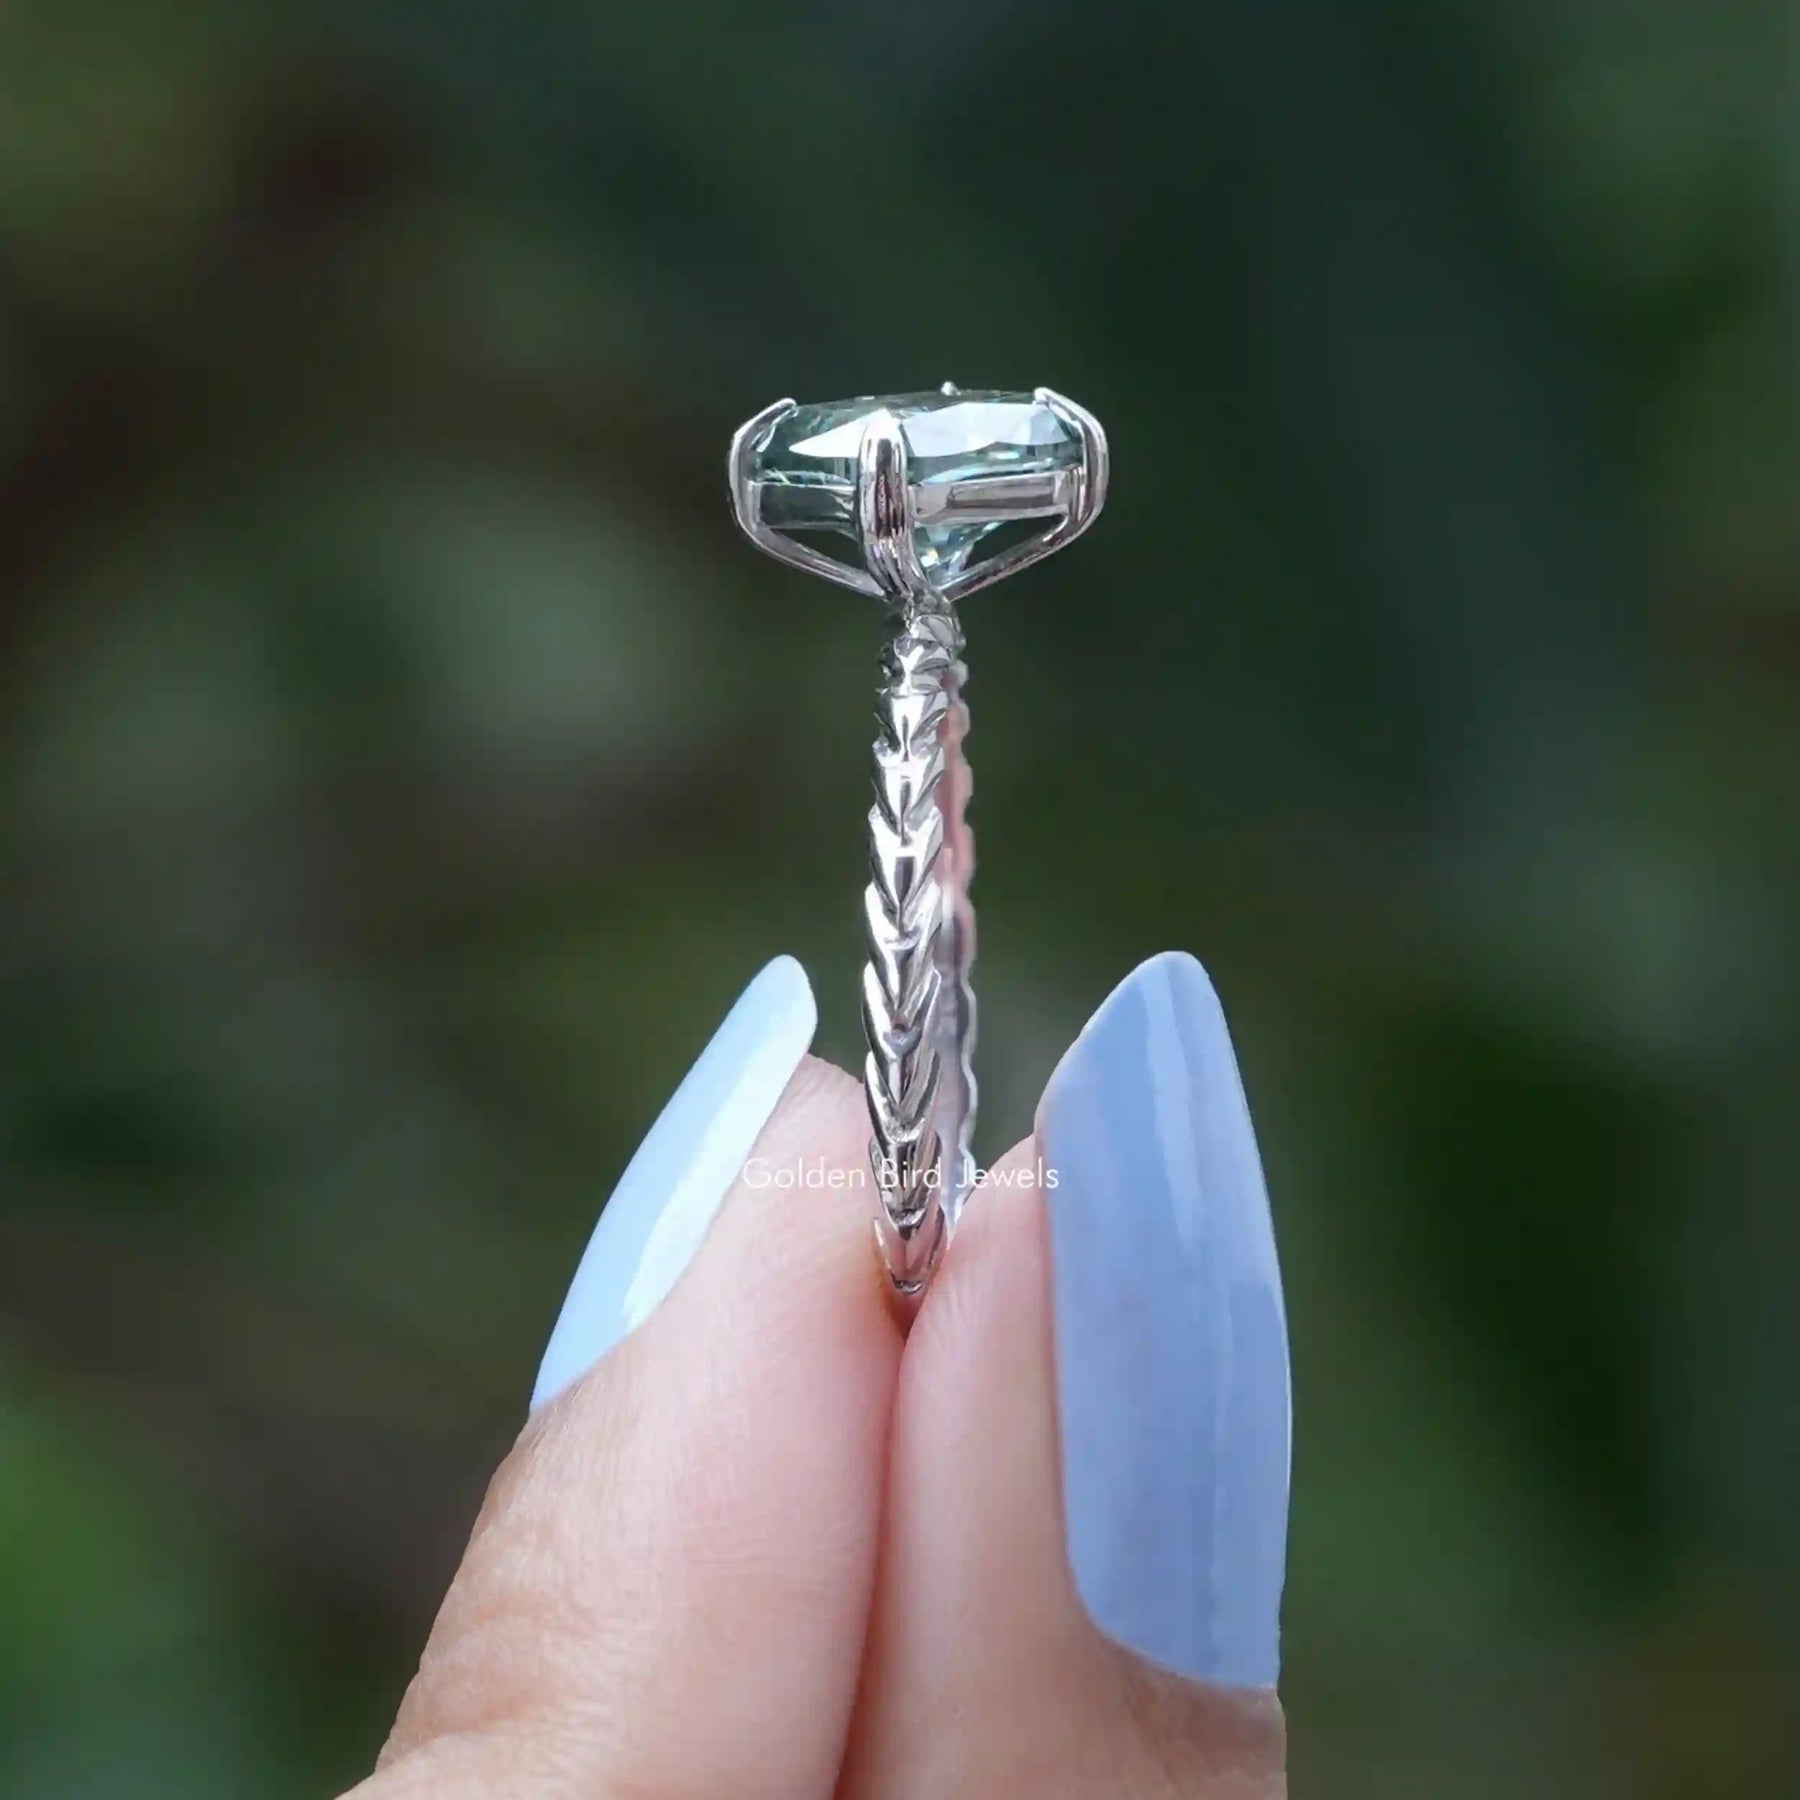 [In Finger a Solid Gold Moissanite Ring In Twist Shank]-[Golden Bird Jewels]